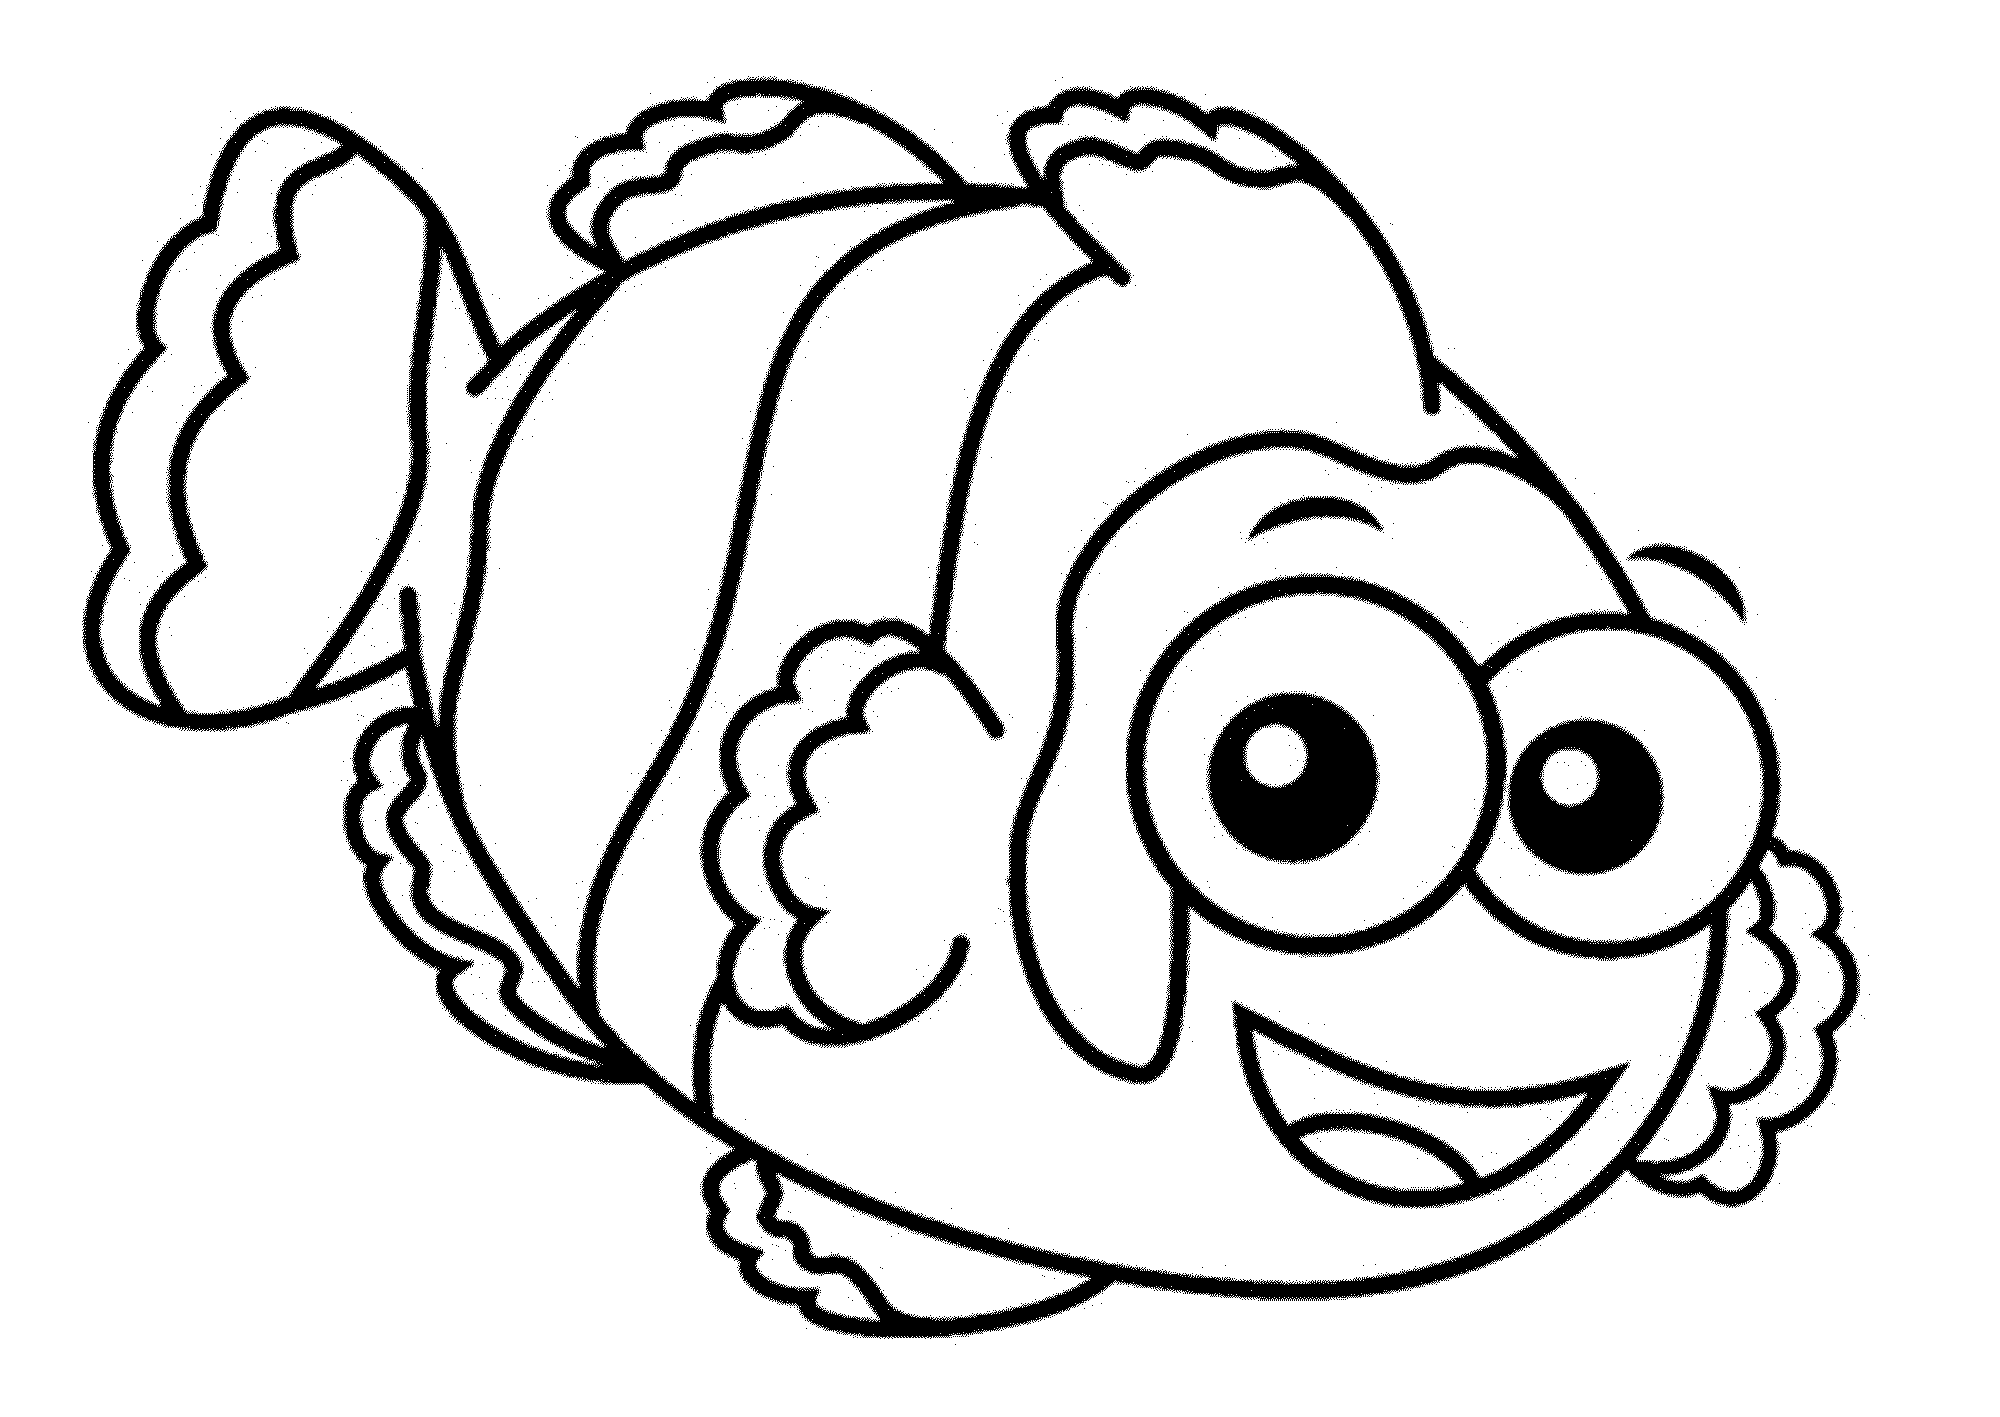 bass fish coloring pages - Printable Kids Colouring Pages